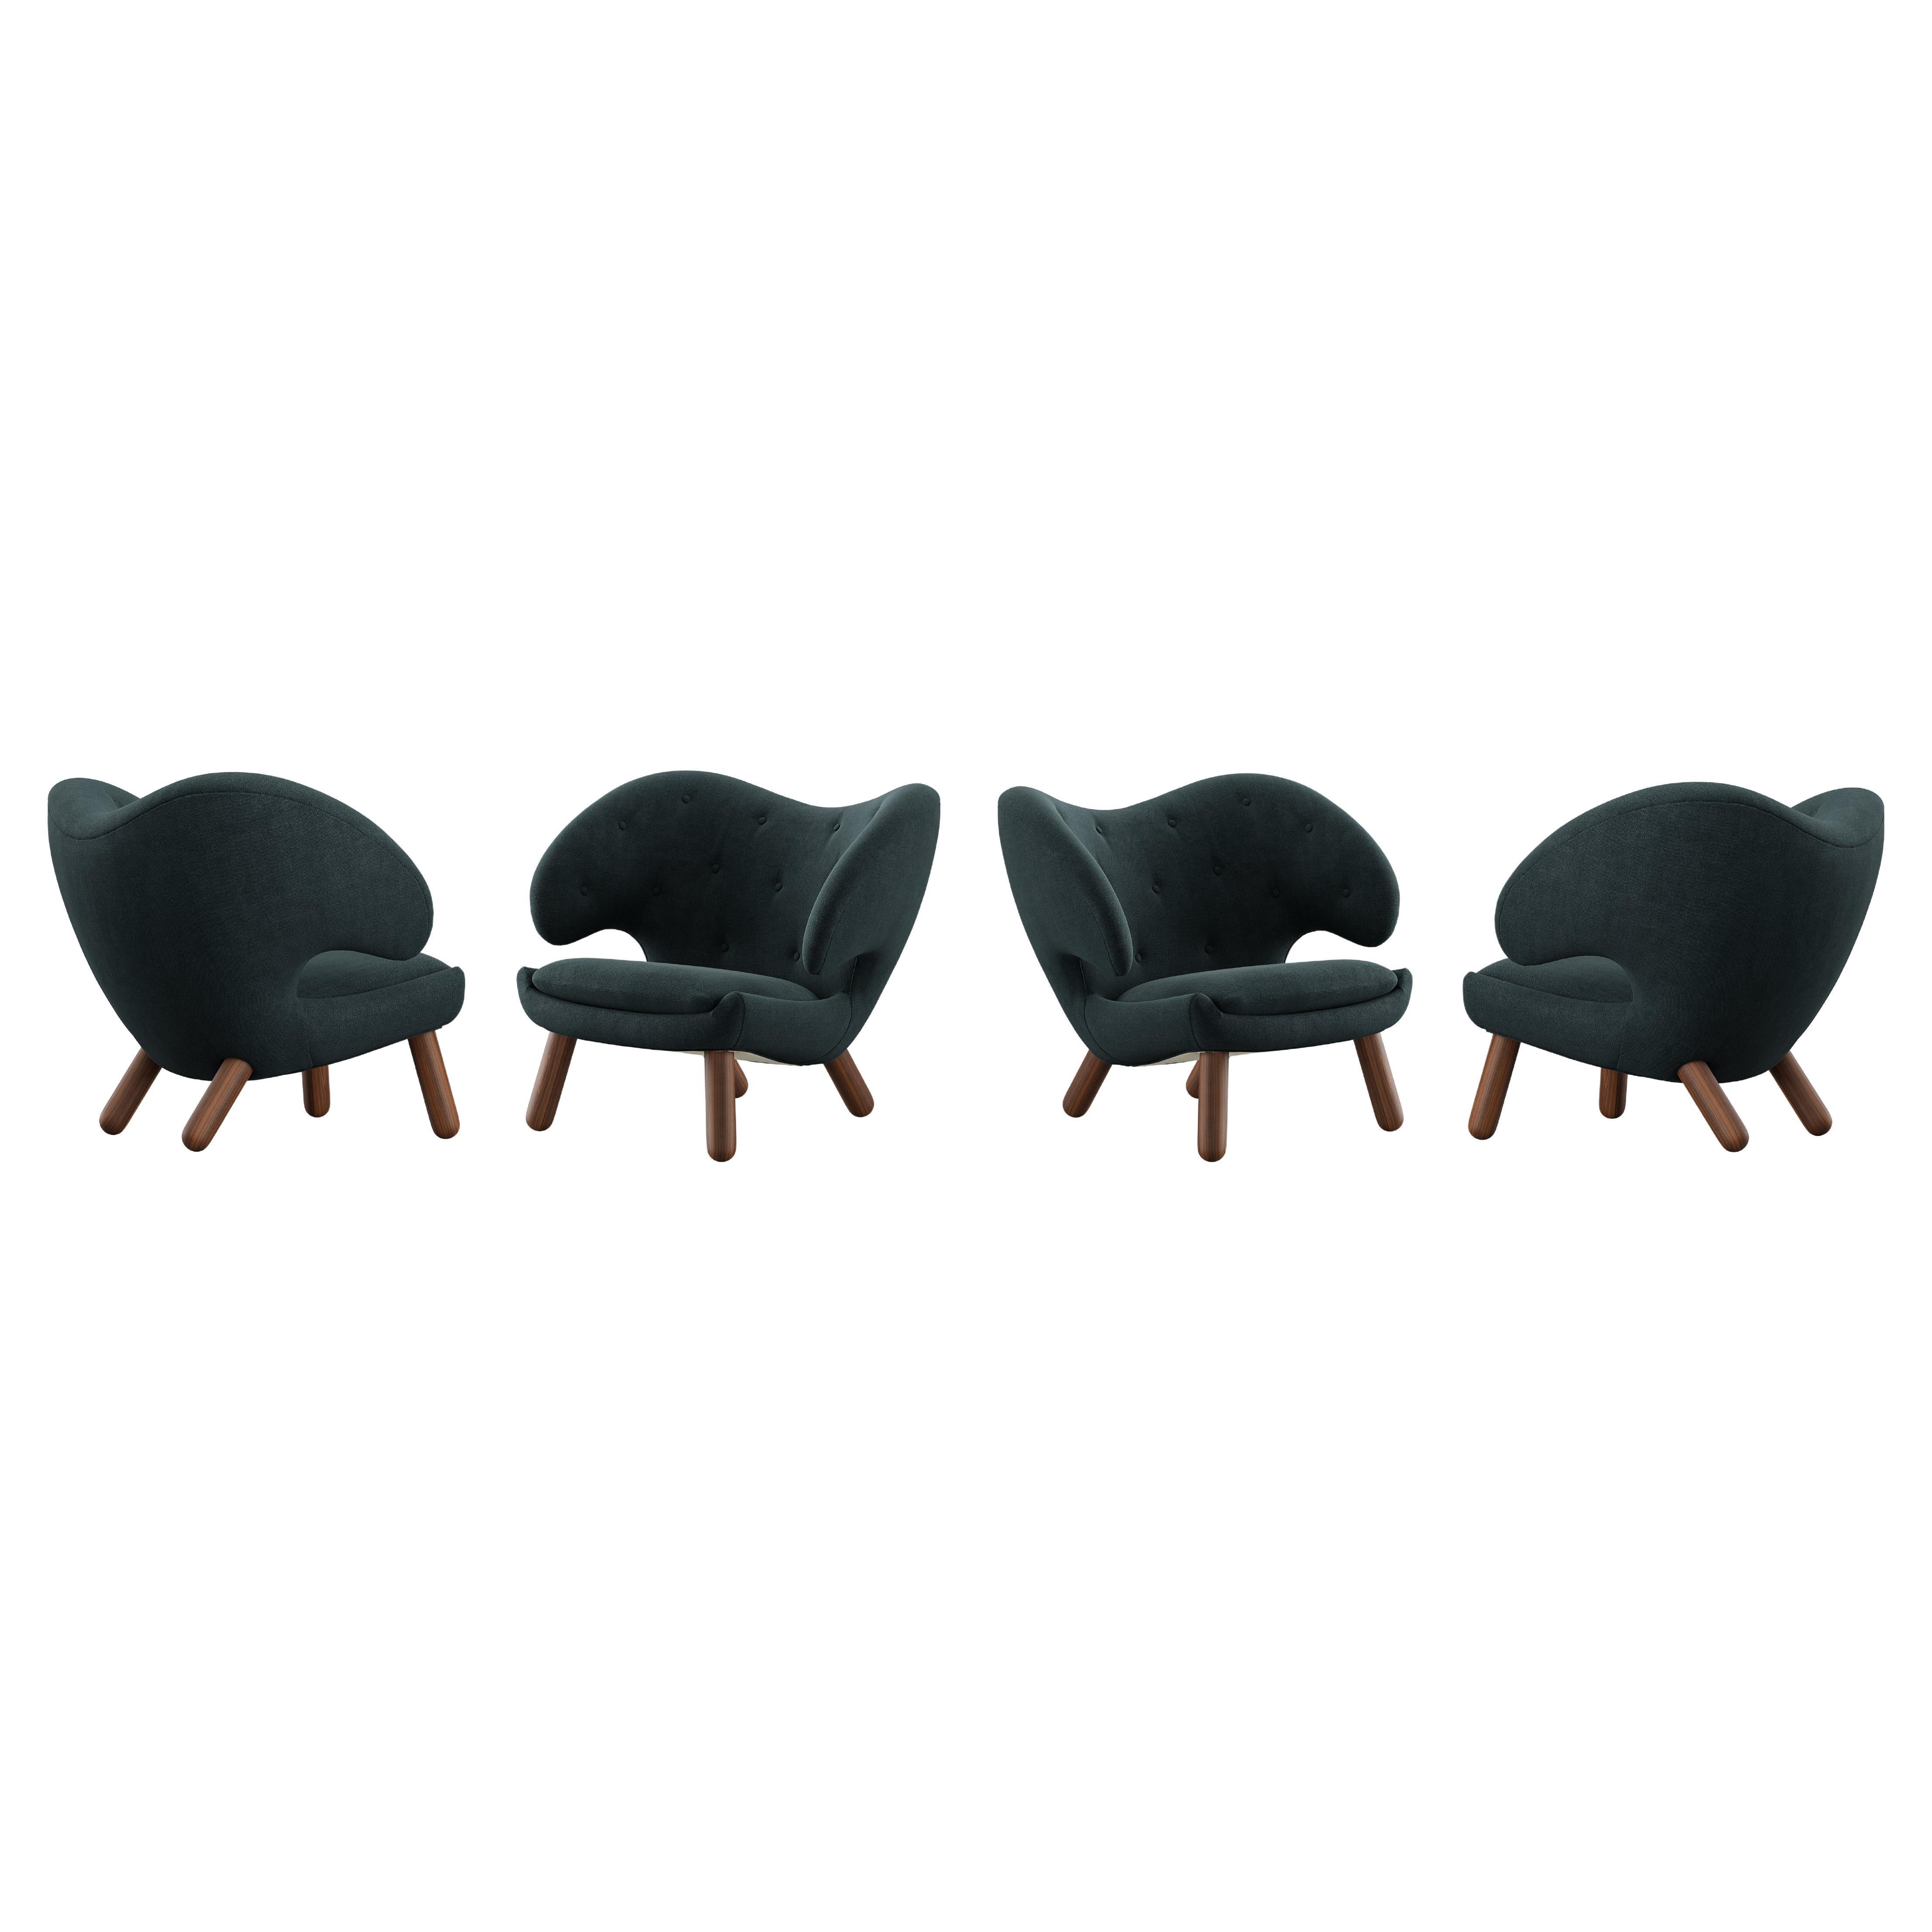 Set of Four Finn Juhl Pelican Chair Upholstered in Wood and Fabric